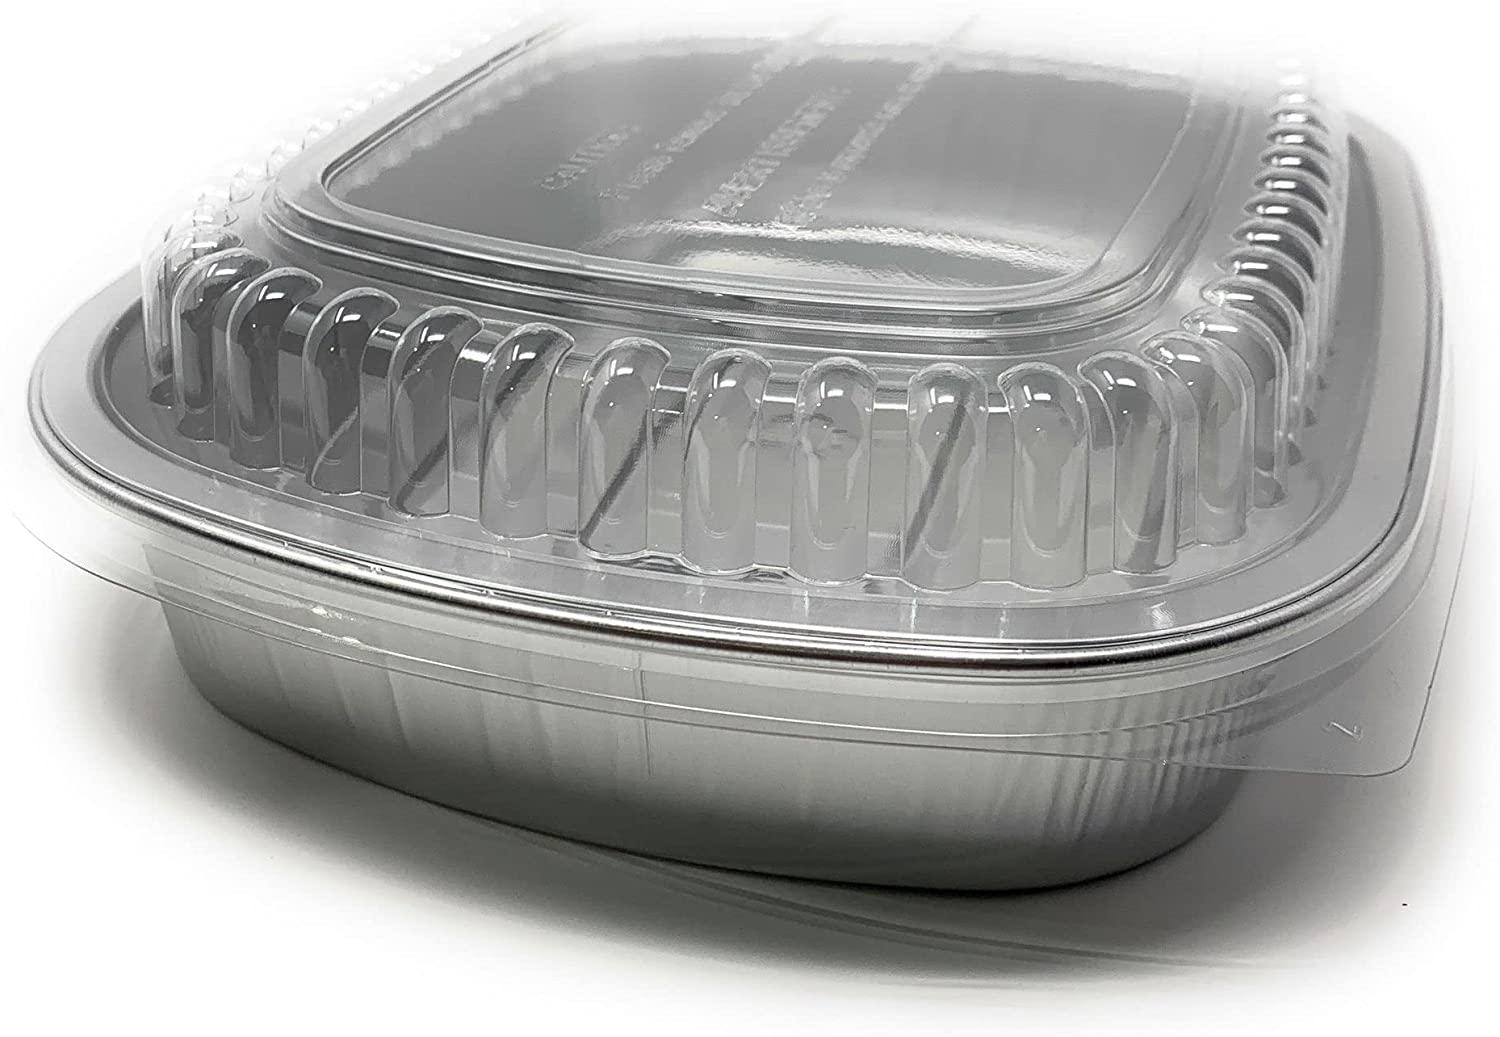 Joyka Re-Heatables Aluminum Food and Storage Containers